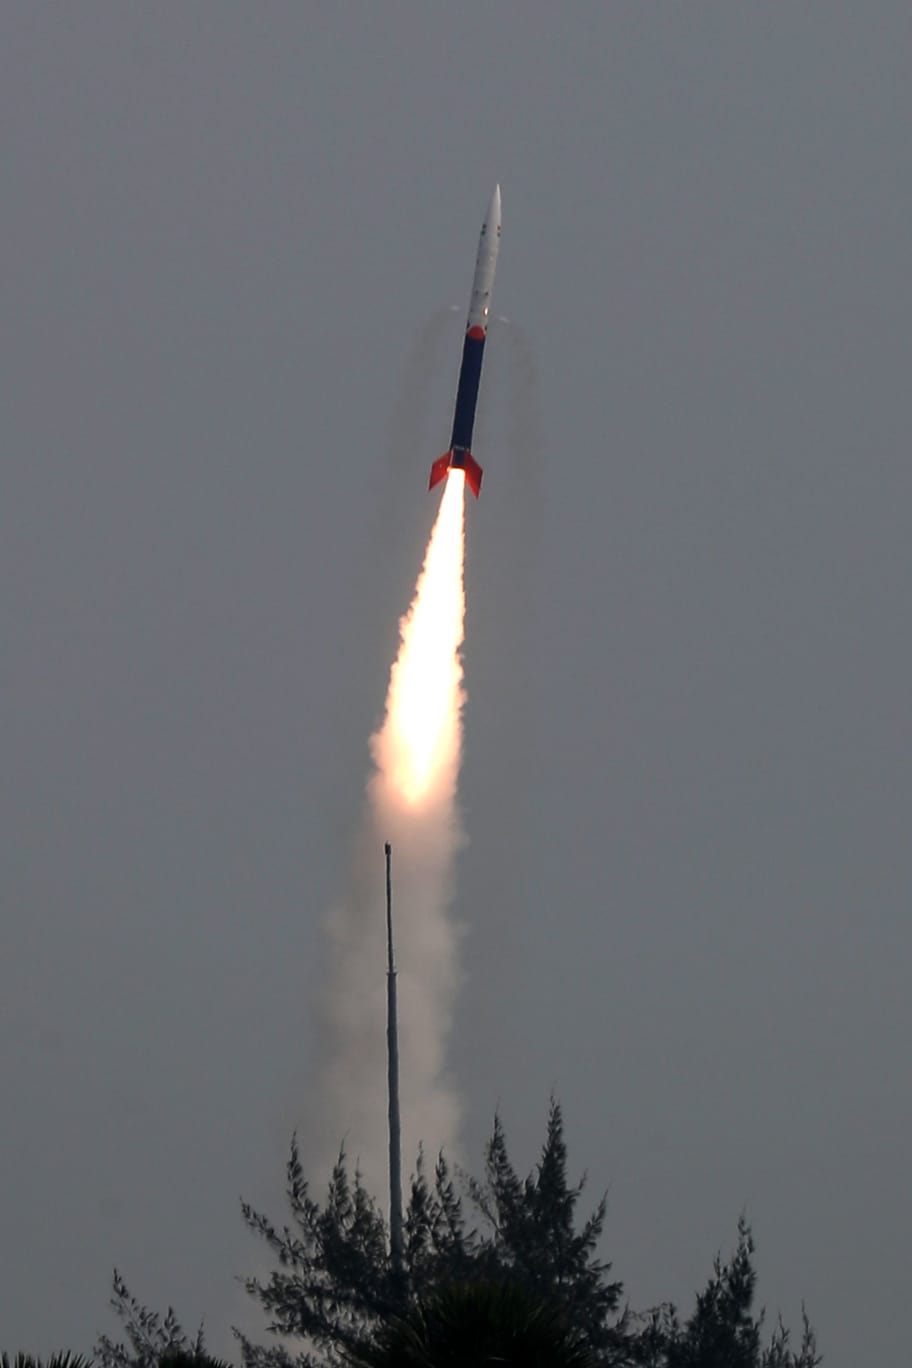 IN-SPACe facilitates maiden flight of India’s first privately designed and built rocket, as Skyroot’s Vikram S Rocket takes off from Satish Dhawan Space Centre, Sriharikota